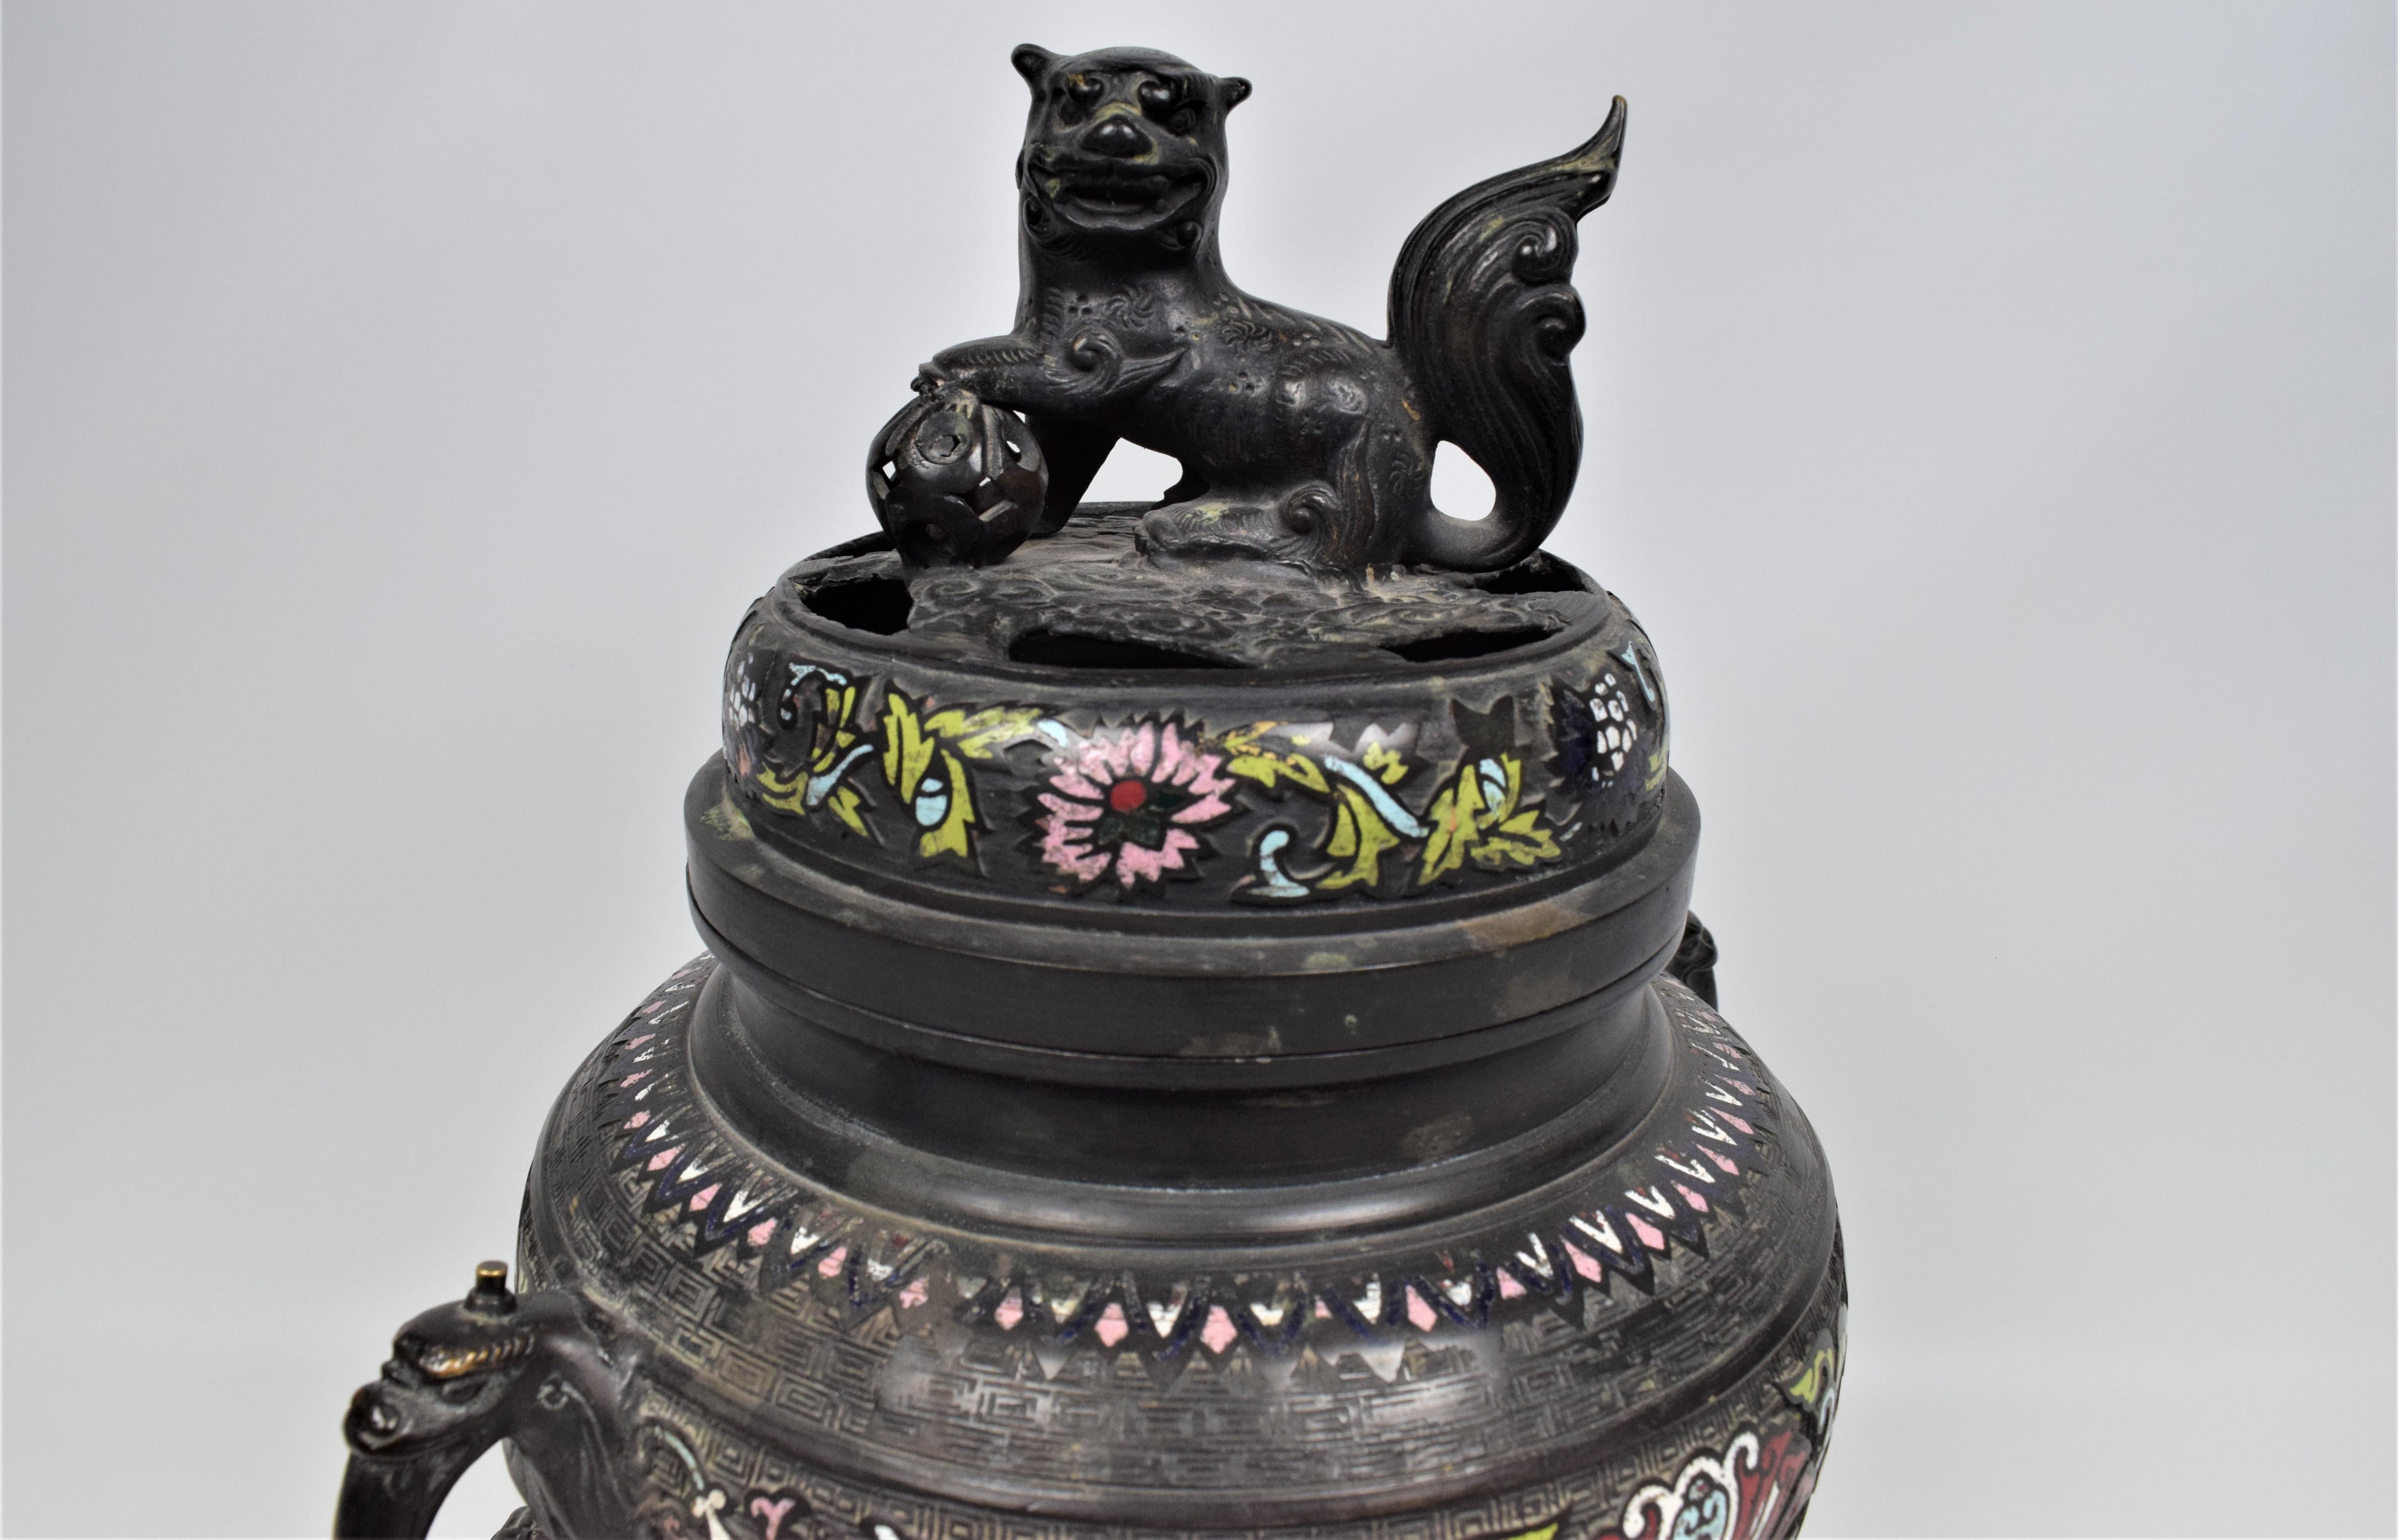 This magnificent pair of 19th-century Chinese gilt cloisonné bronze incense burners is a testament to the artistry and craftsmanship of the period. Each burner, standing on an ornate base, is elevated by intricately detailed dragons, their sinuous